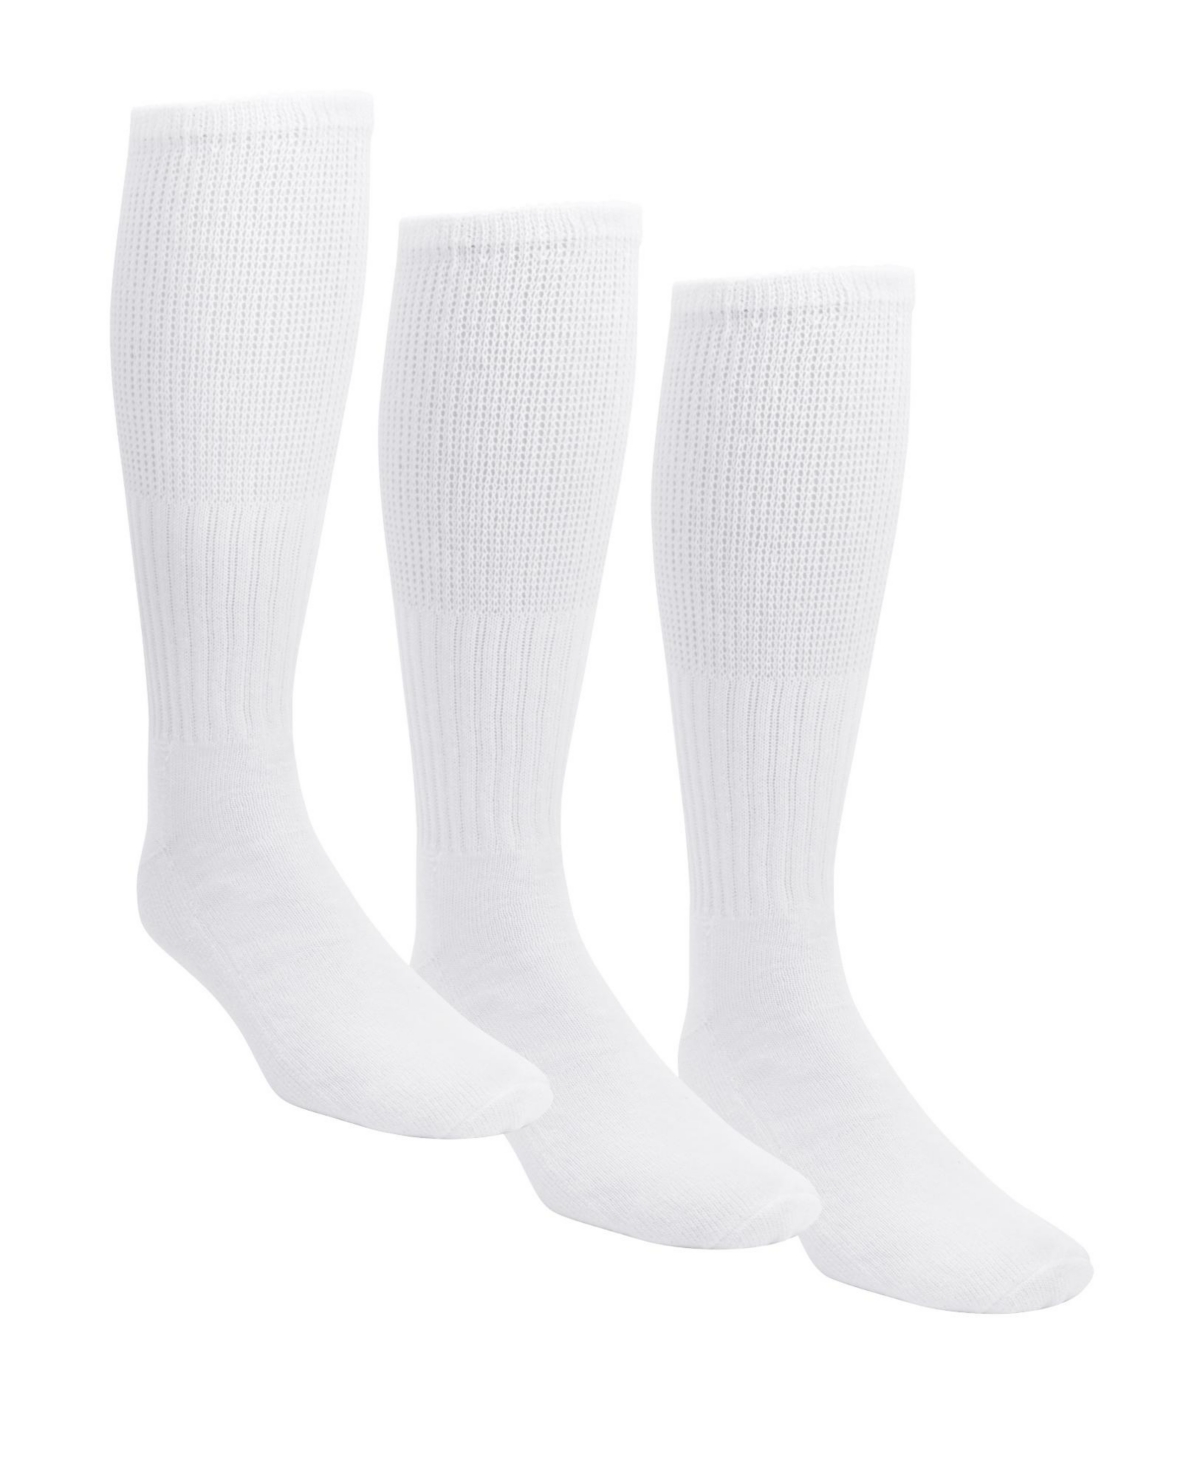 Big & Tall Diabetic Over-The-Calf Extra Wide Socks 3-Pack - Grey